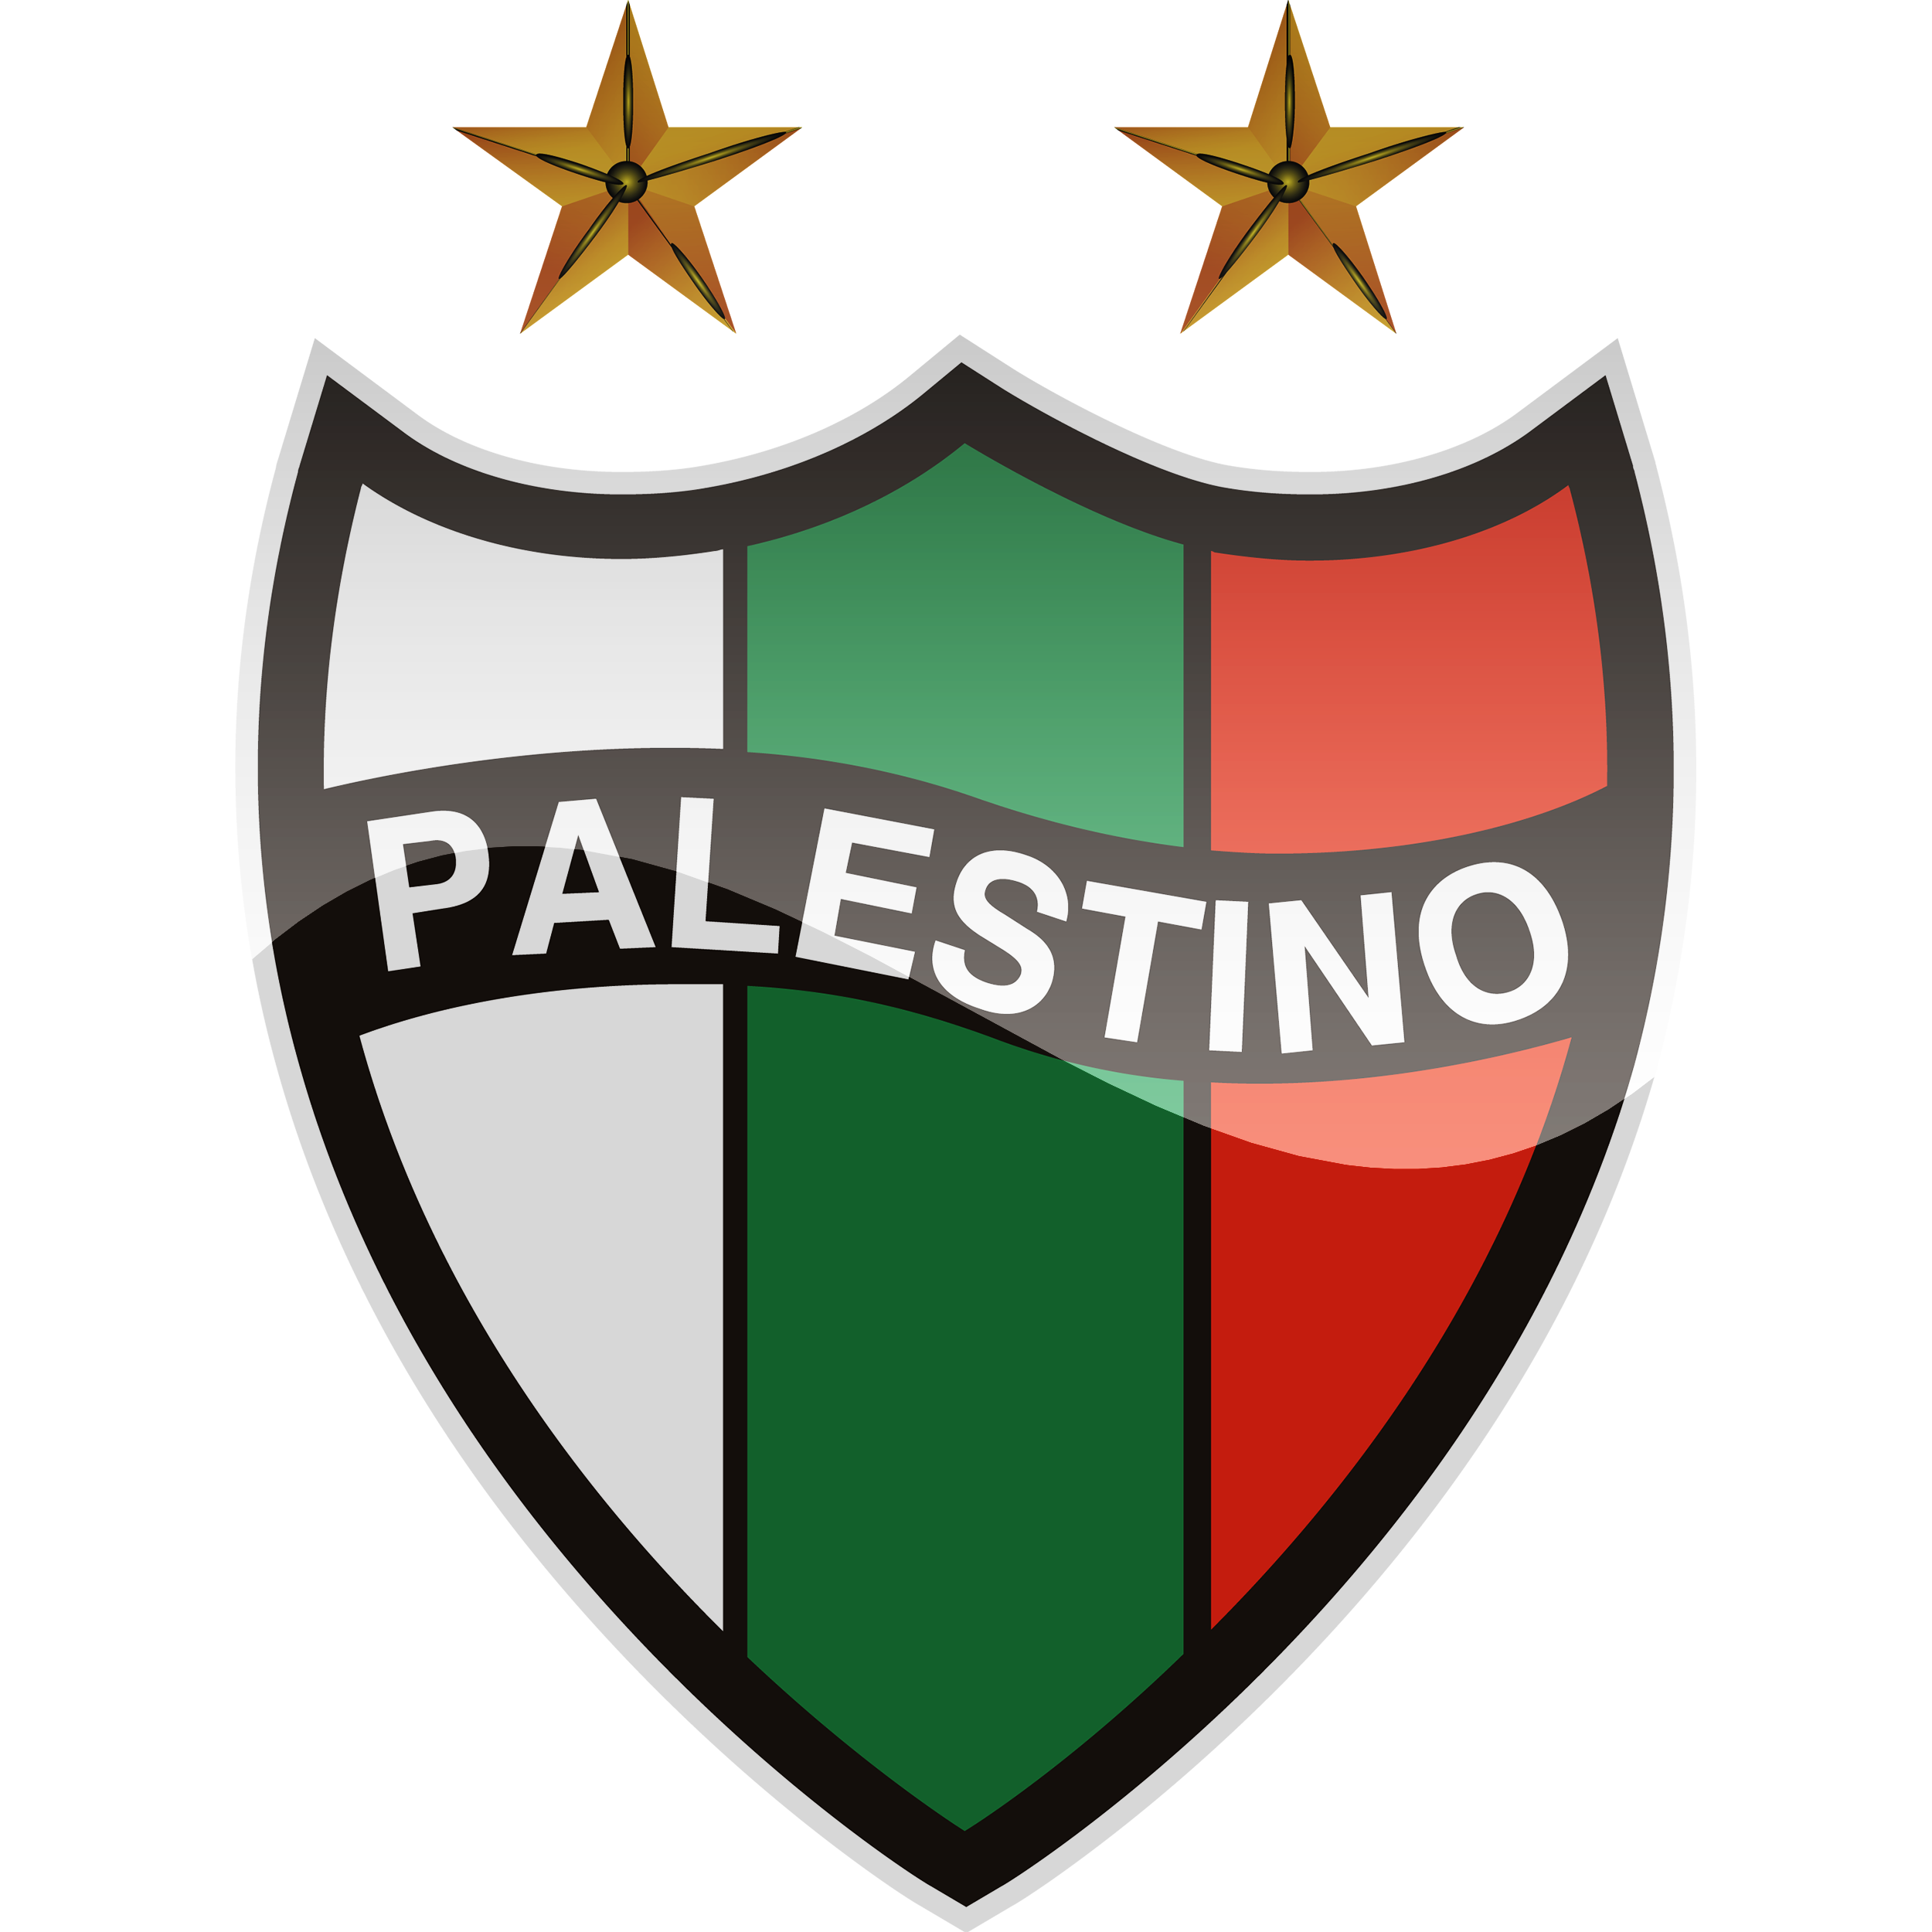 Palestino vs Fortaleza Prediction: The hosts are one point away from knock out phase